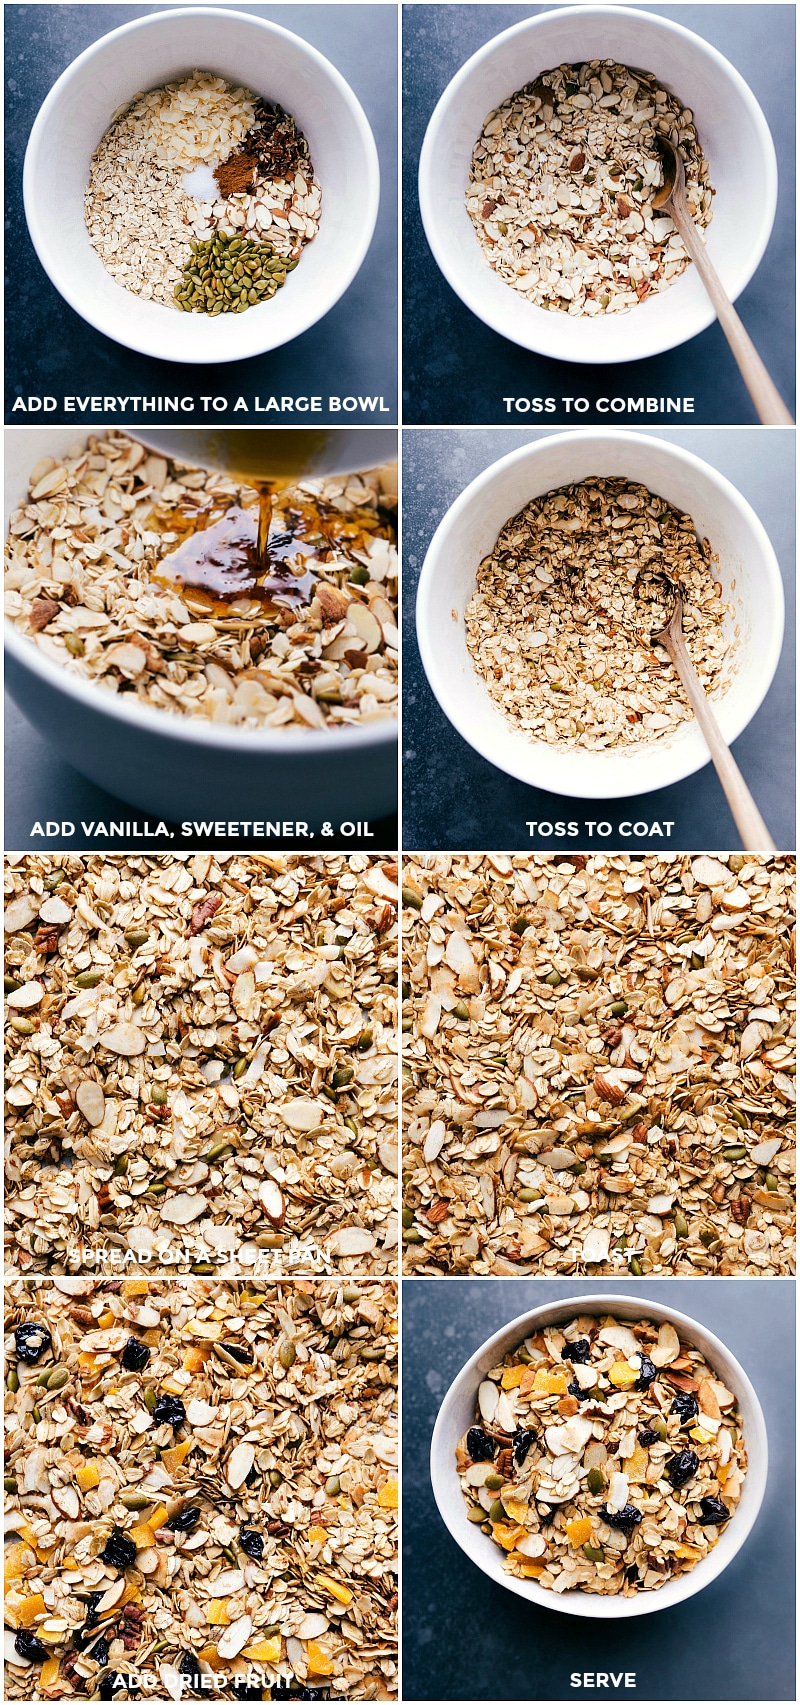 Preparation of homemade muesli recipe, with ingredients mixed in a large bowl, spread on a baking sheet for baking, and served with added fruit.